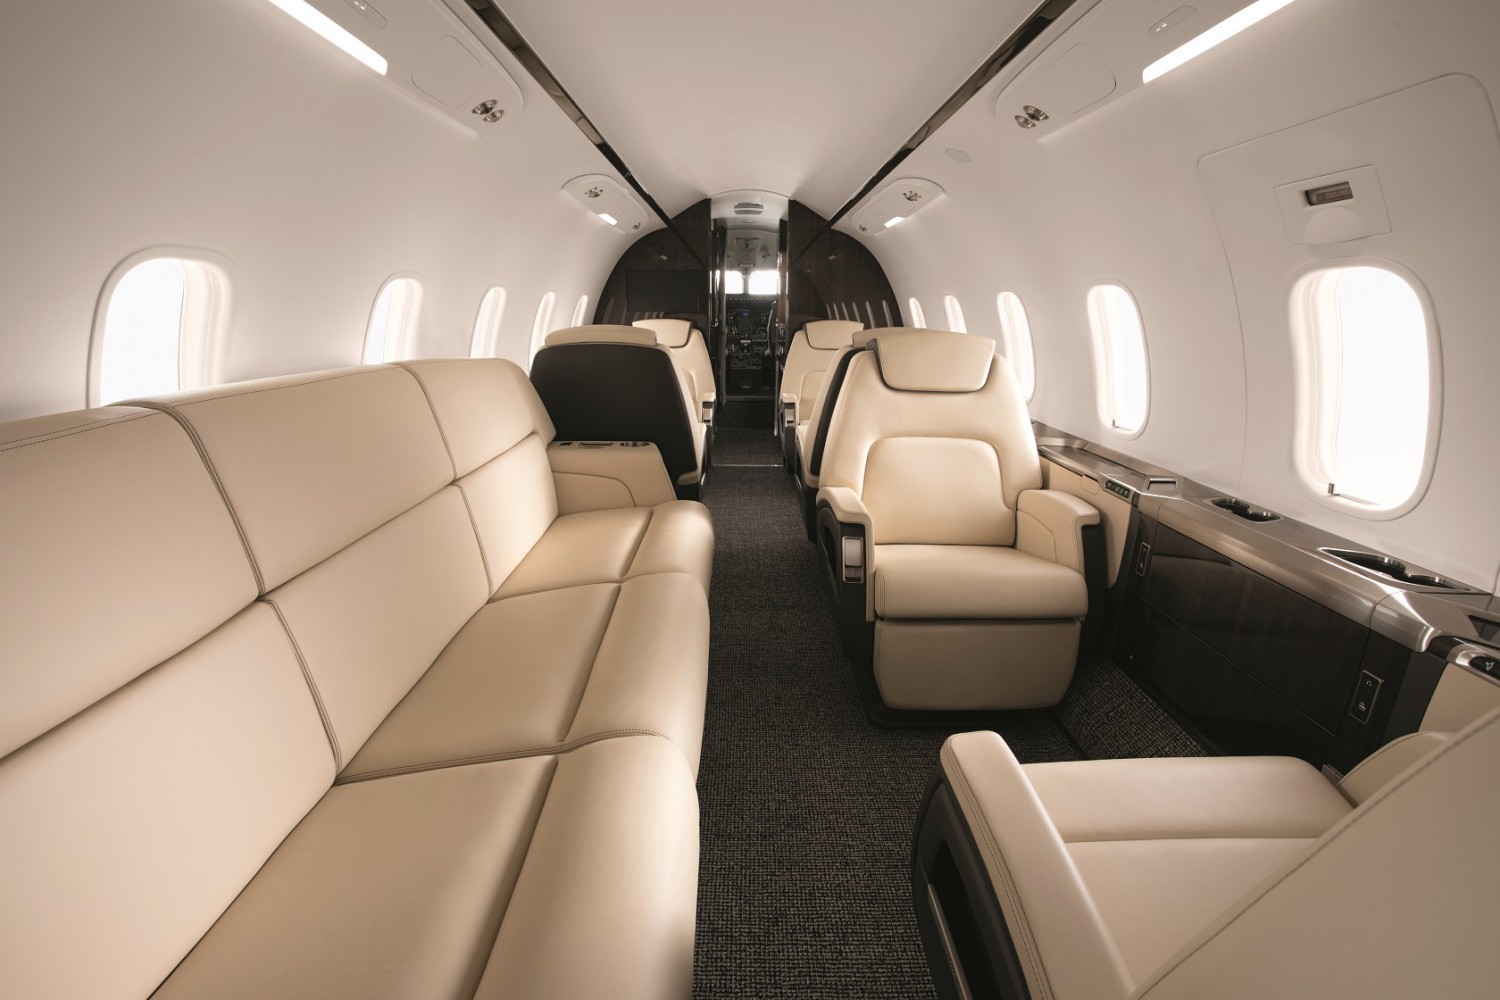 A couch inside the Challenger 350 business jet